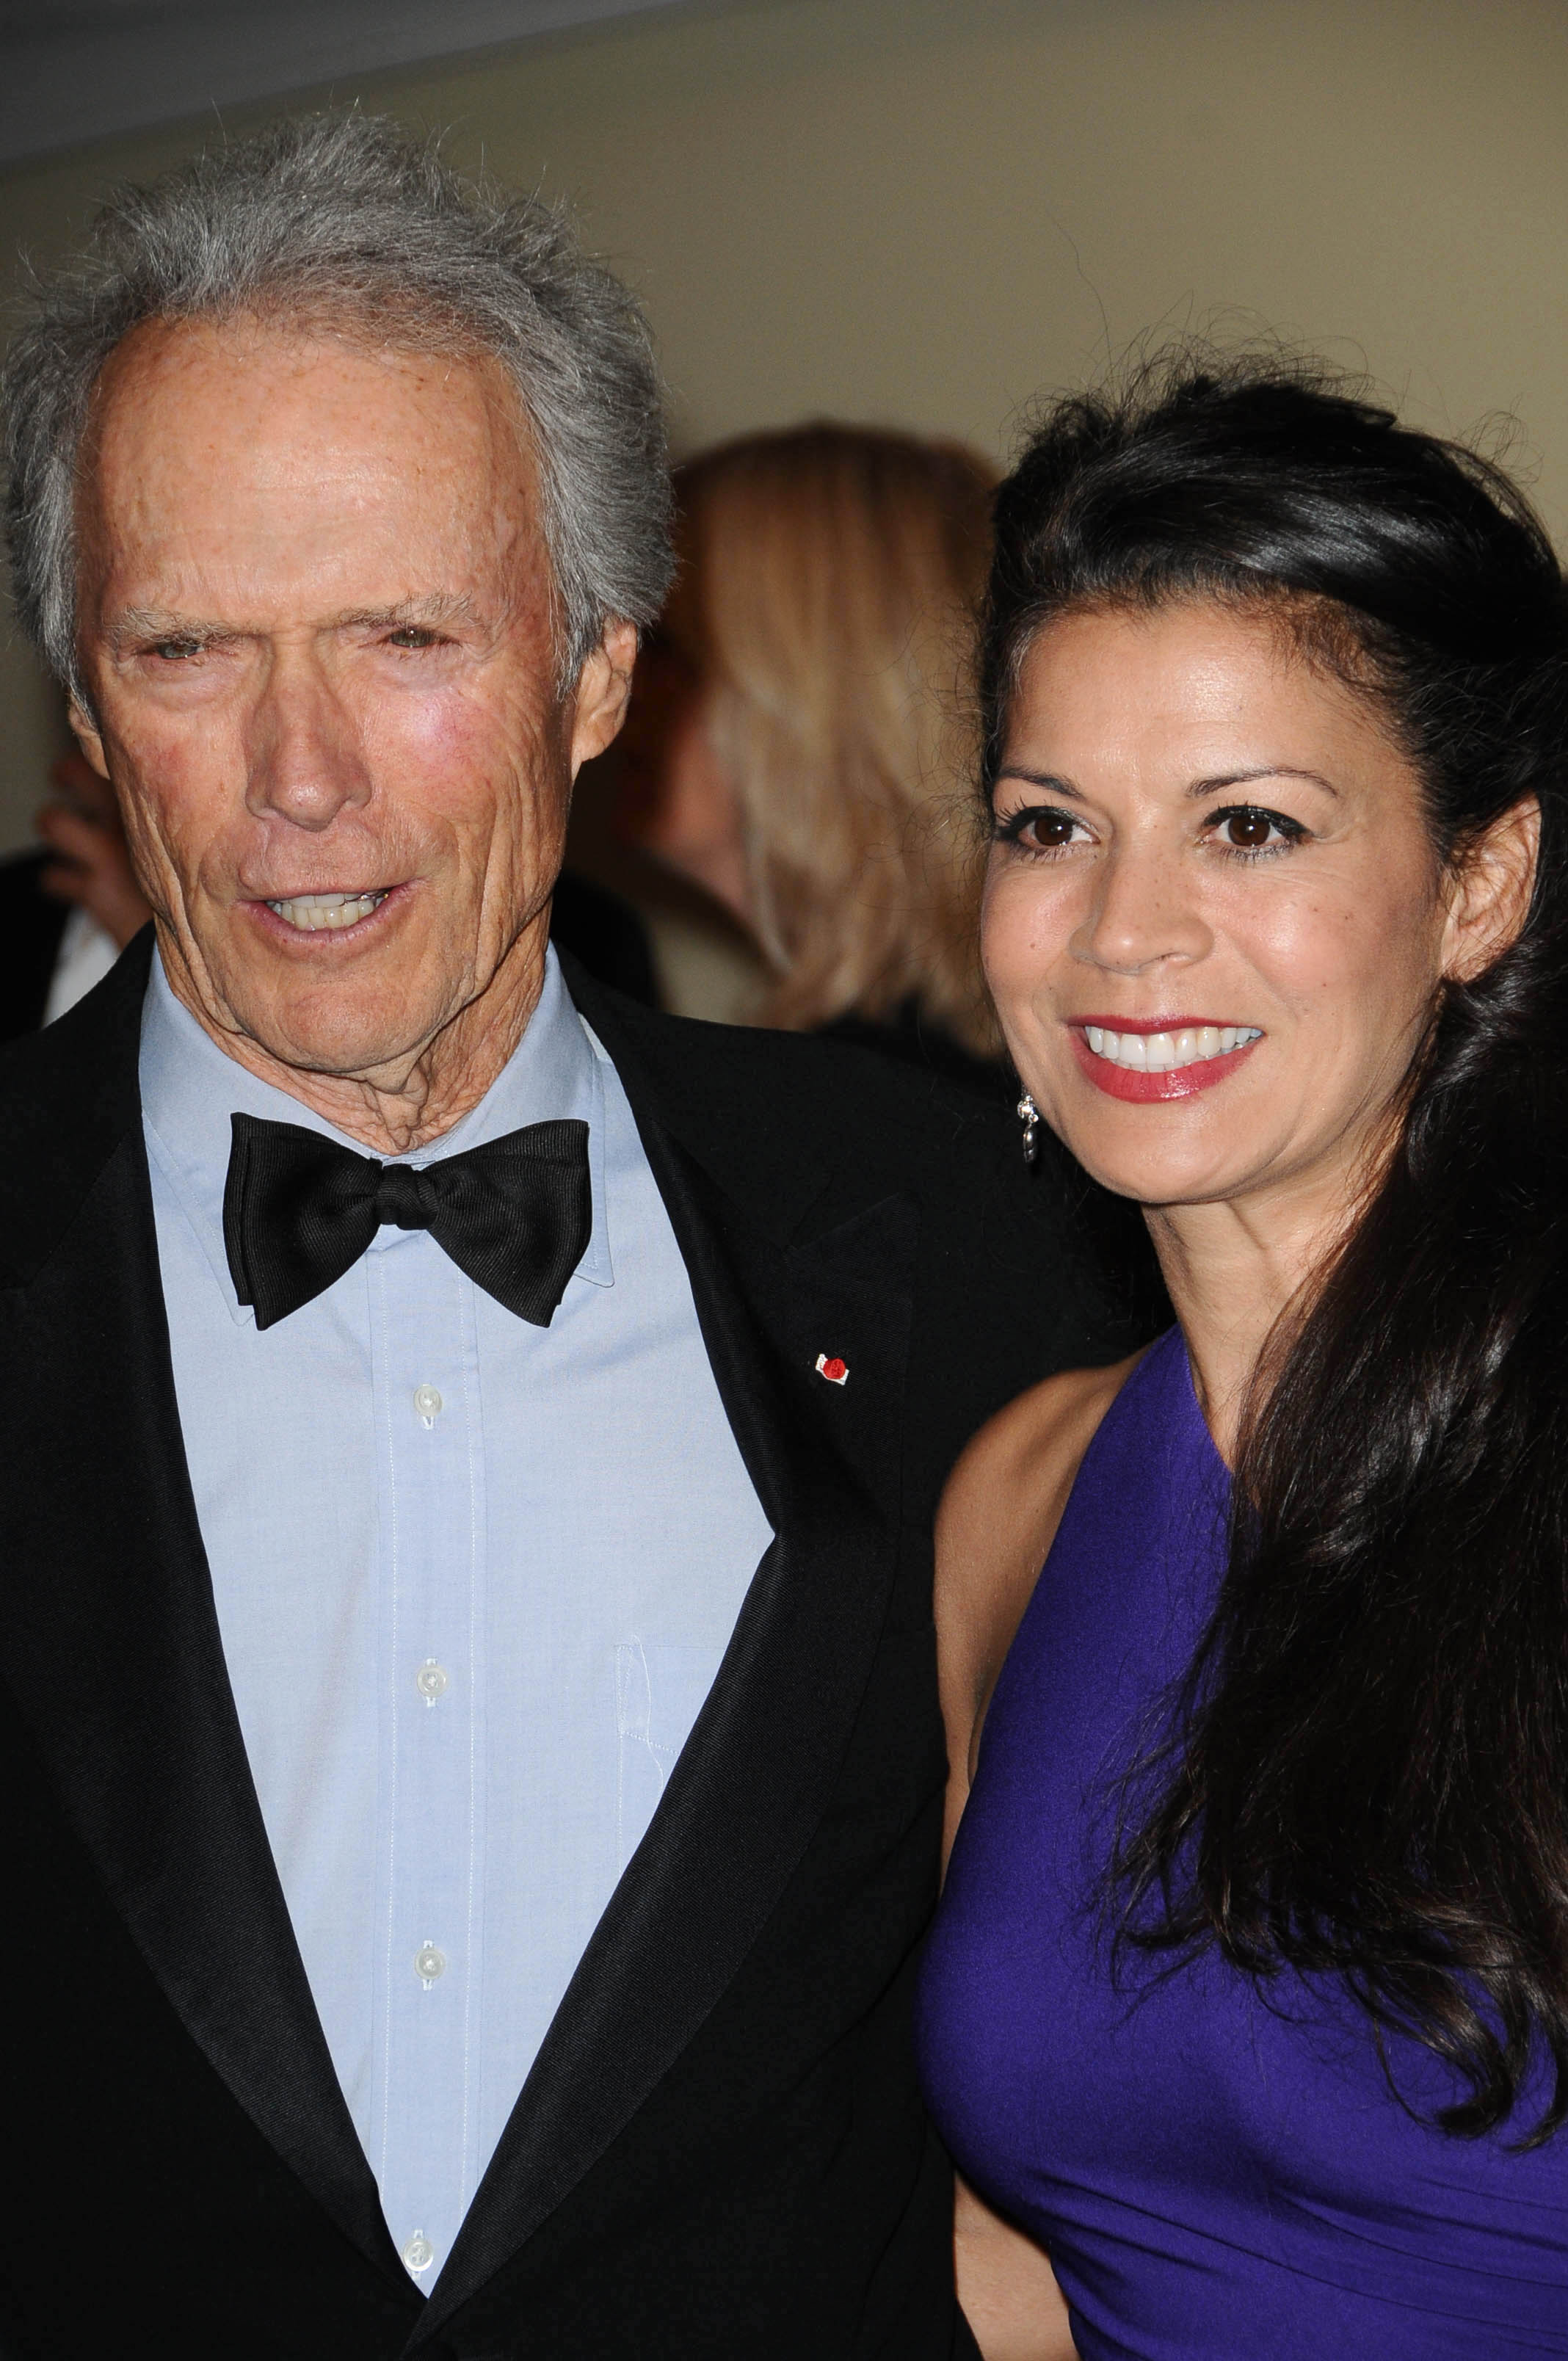 <p>Could the 35 years between Clint Eastwood and Dina Eastwood be one of the reasons their marriage failed? The couple divorced in 2014.</p>